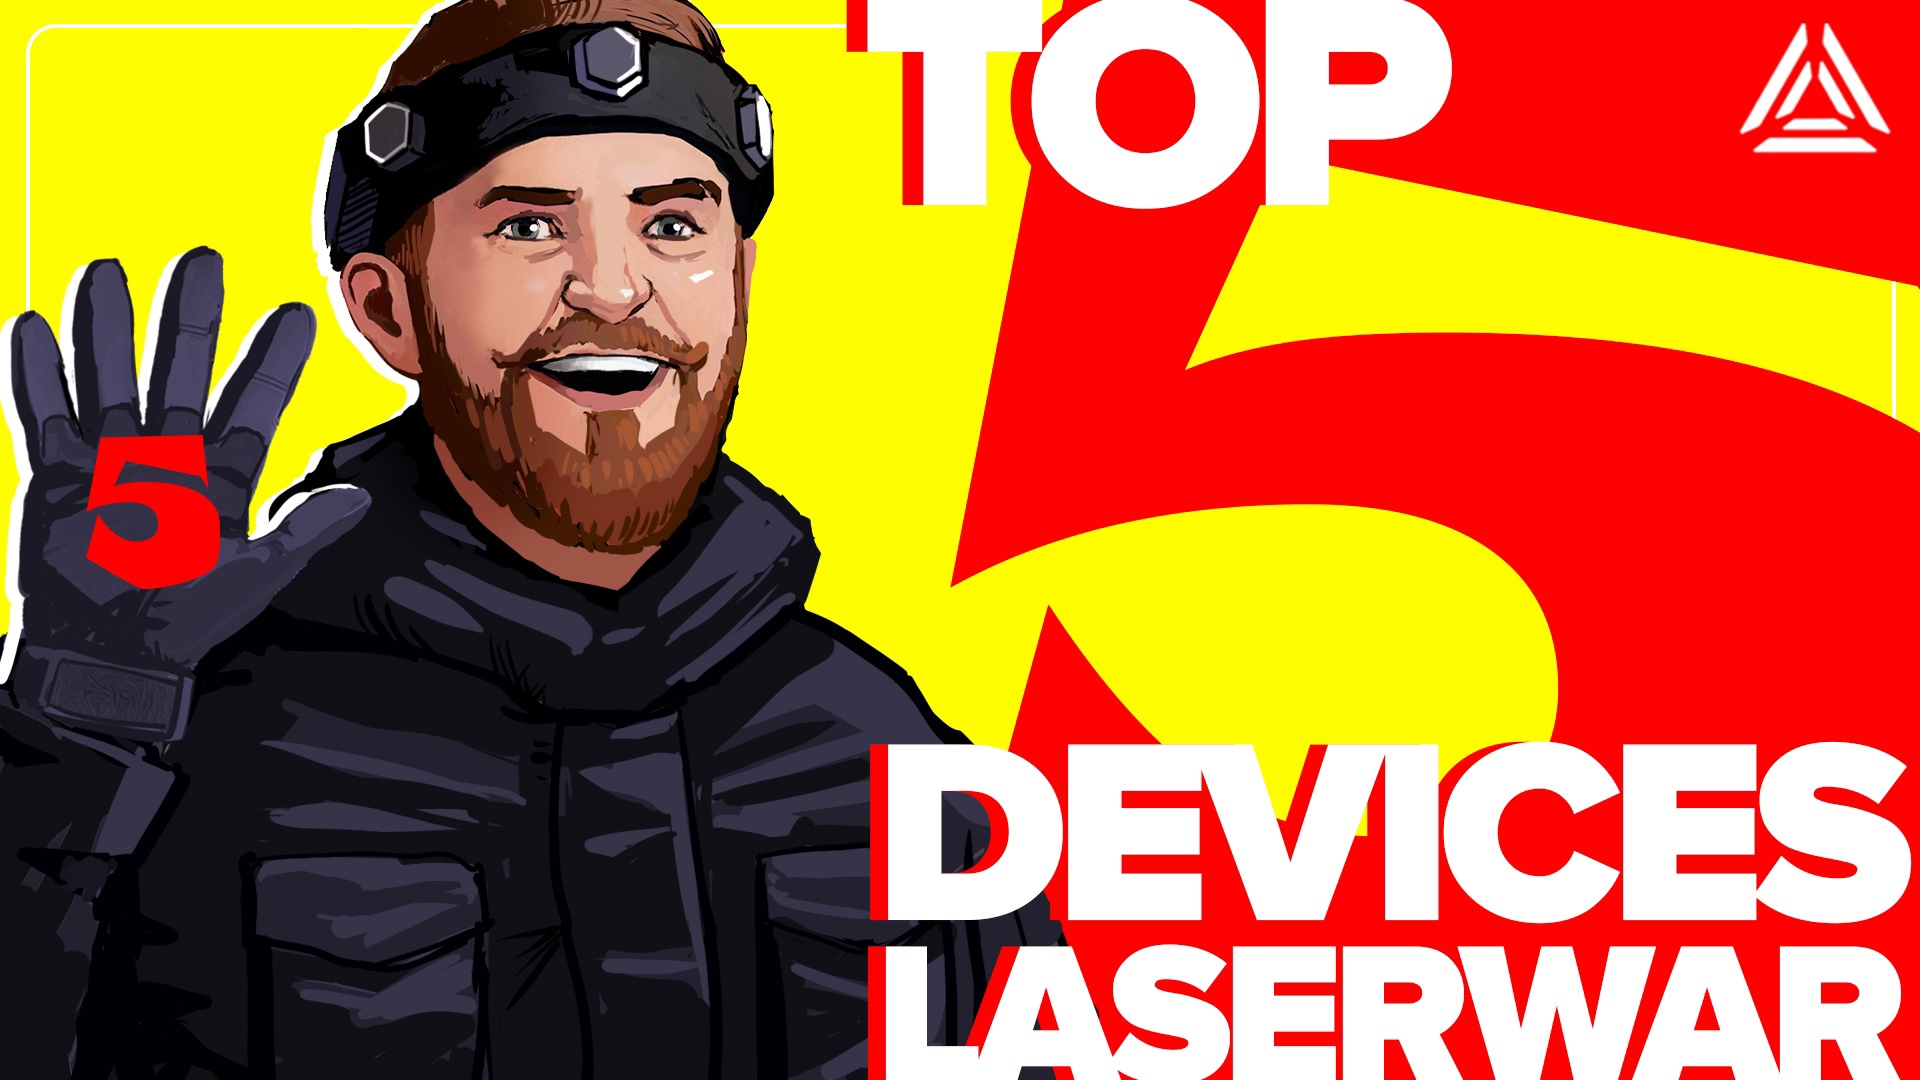 Top 5 LASERWAR devices. Video overview